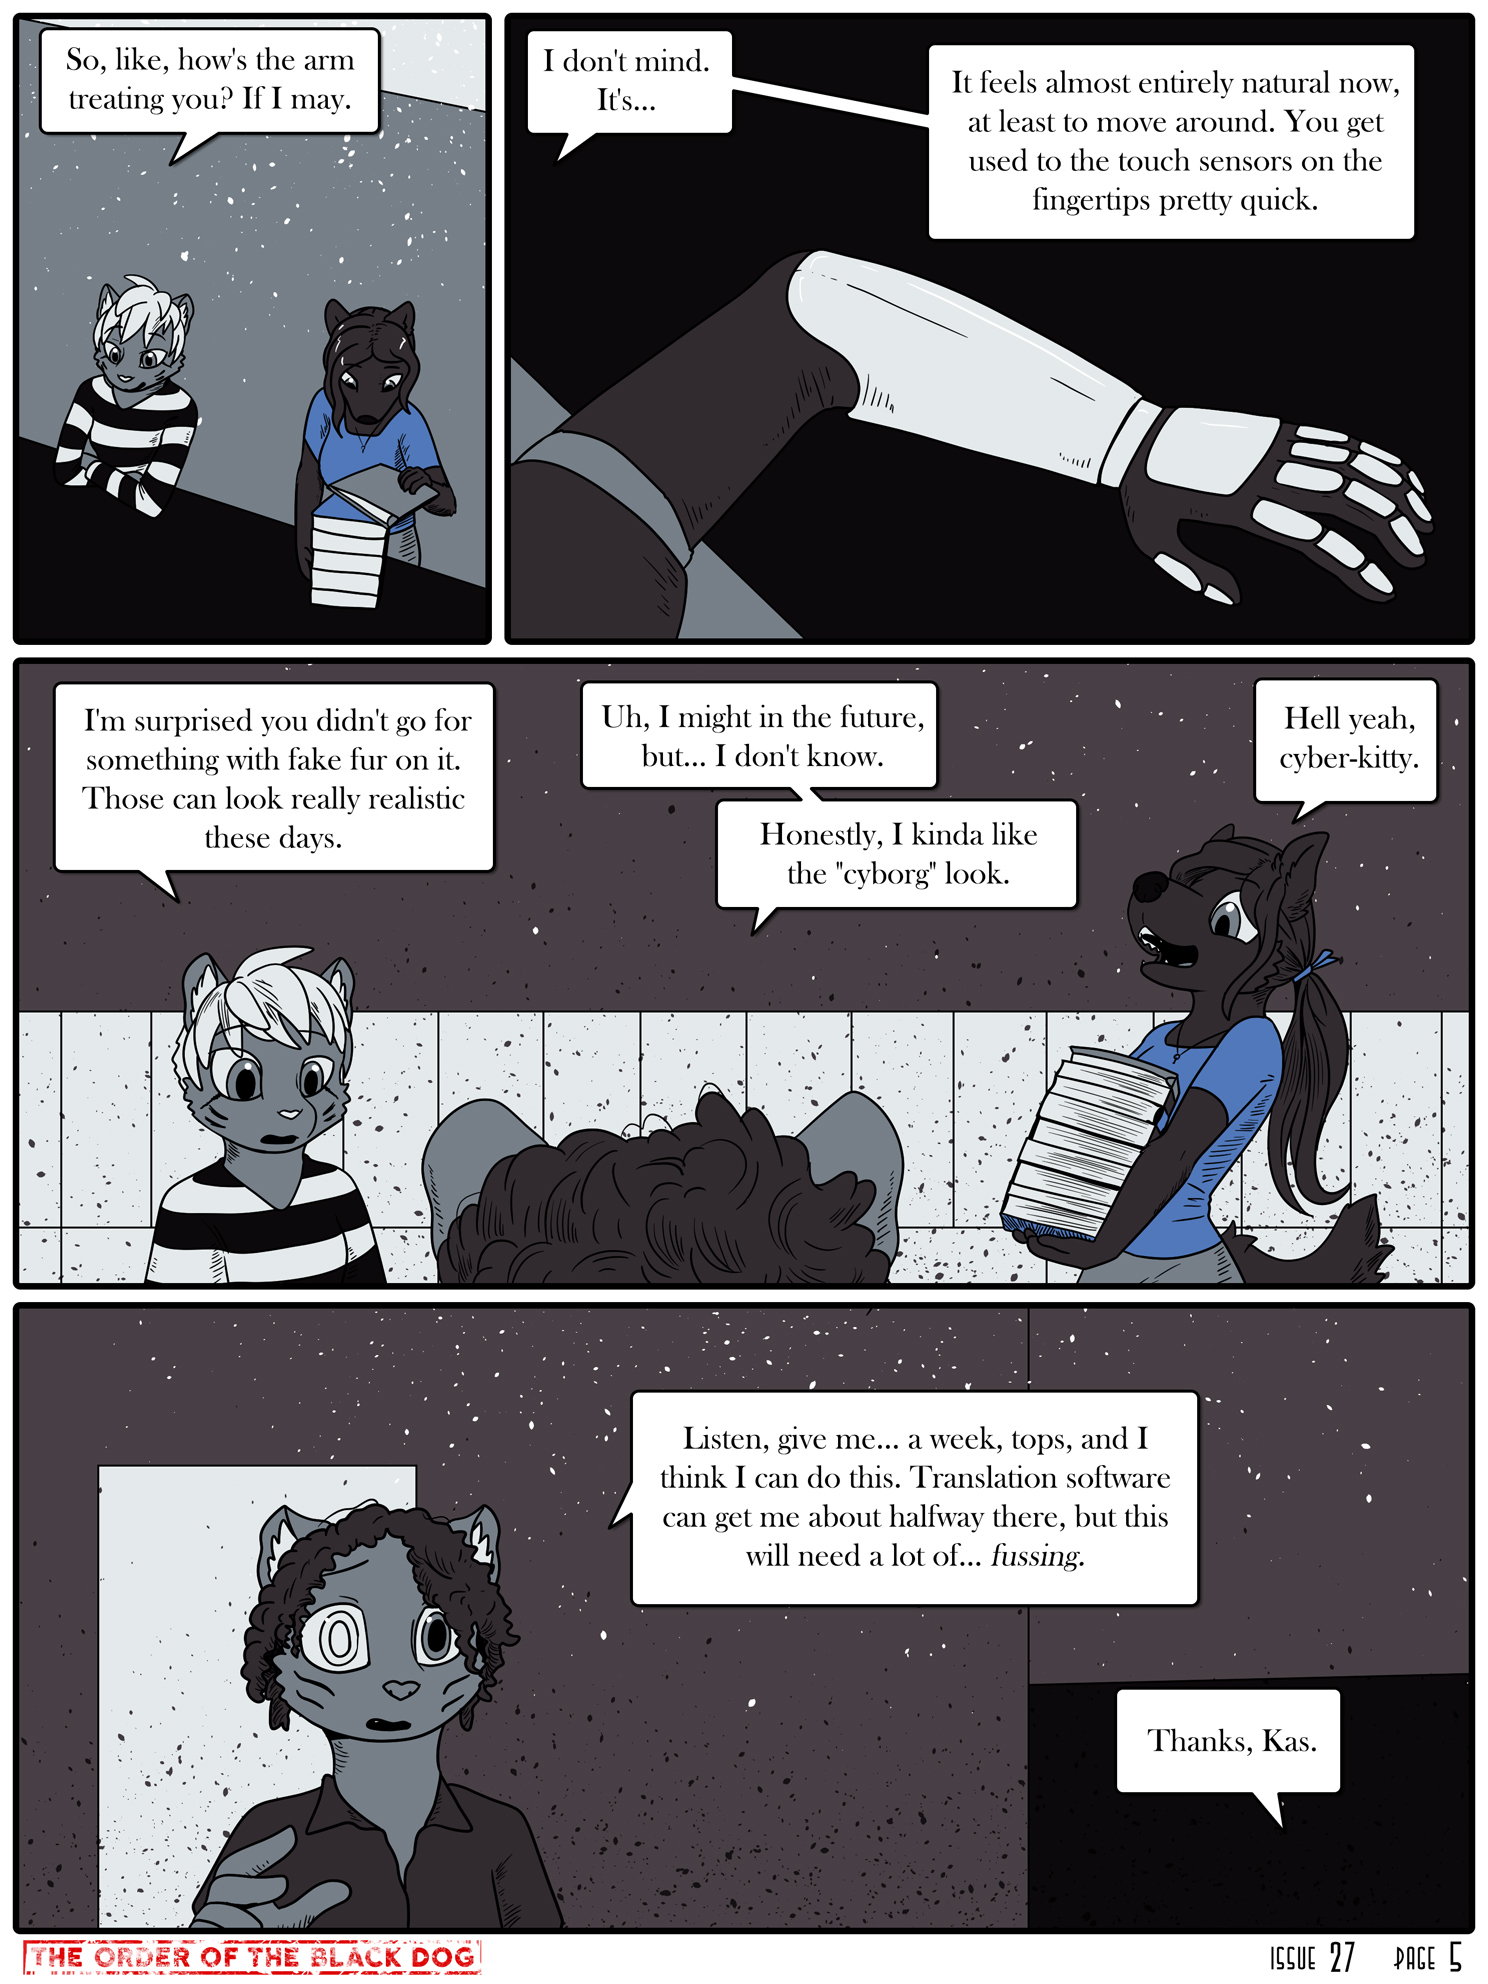 Issue 27, Page 5